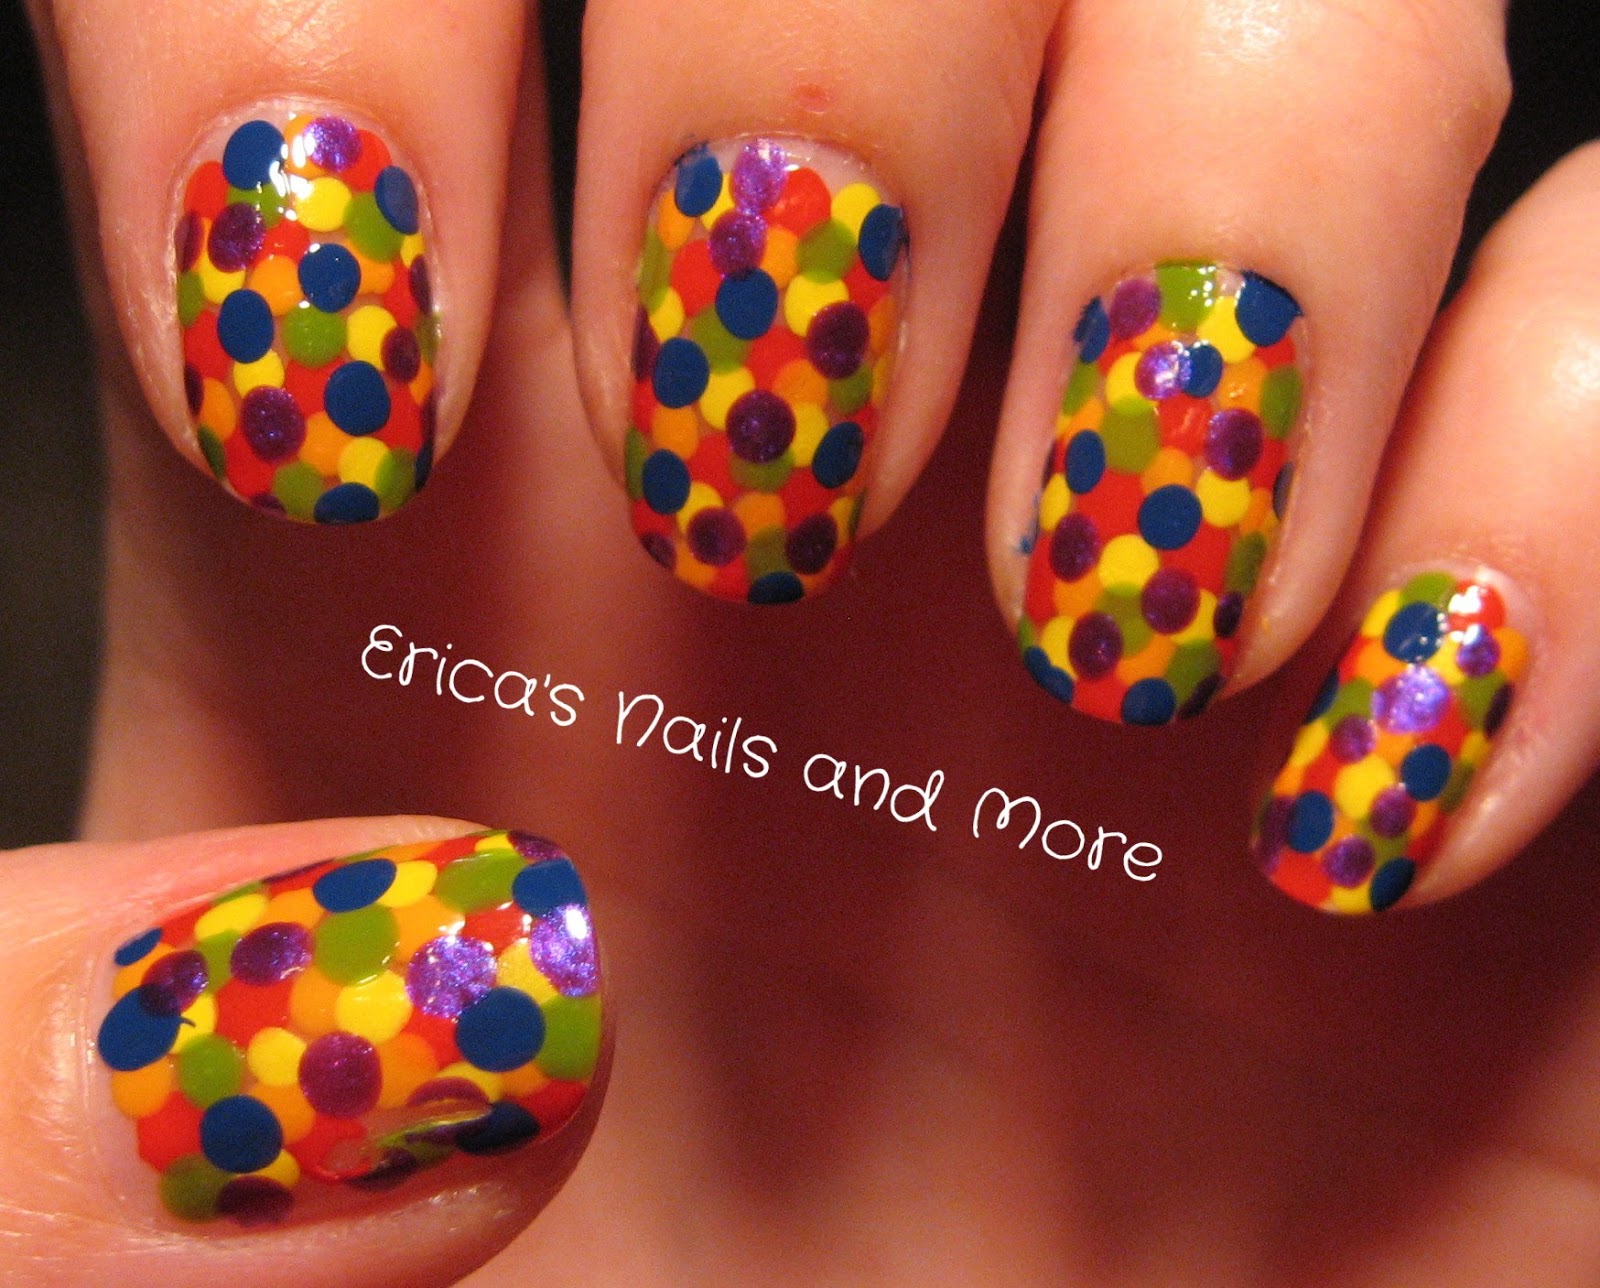 Erica's Nails and More: NOTD: Scratchboard Nails